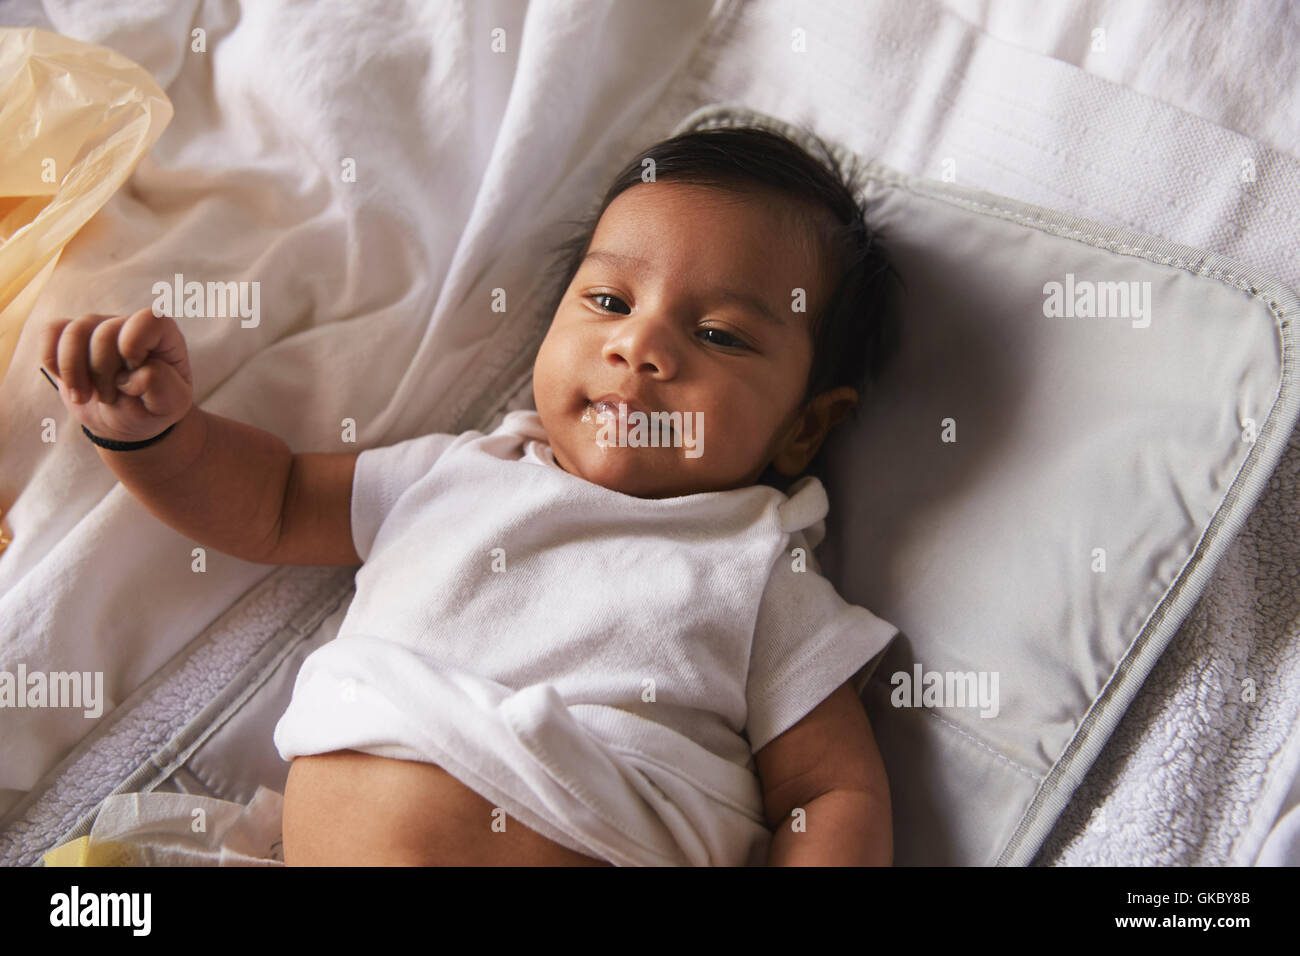 Looking Down On Happy Baby Boy Lying On Changing Mat Stock Photo